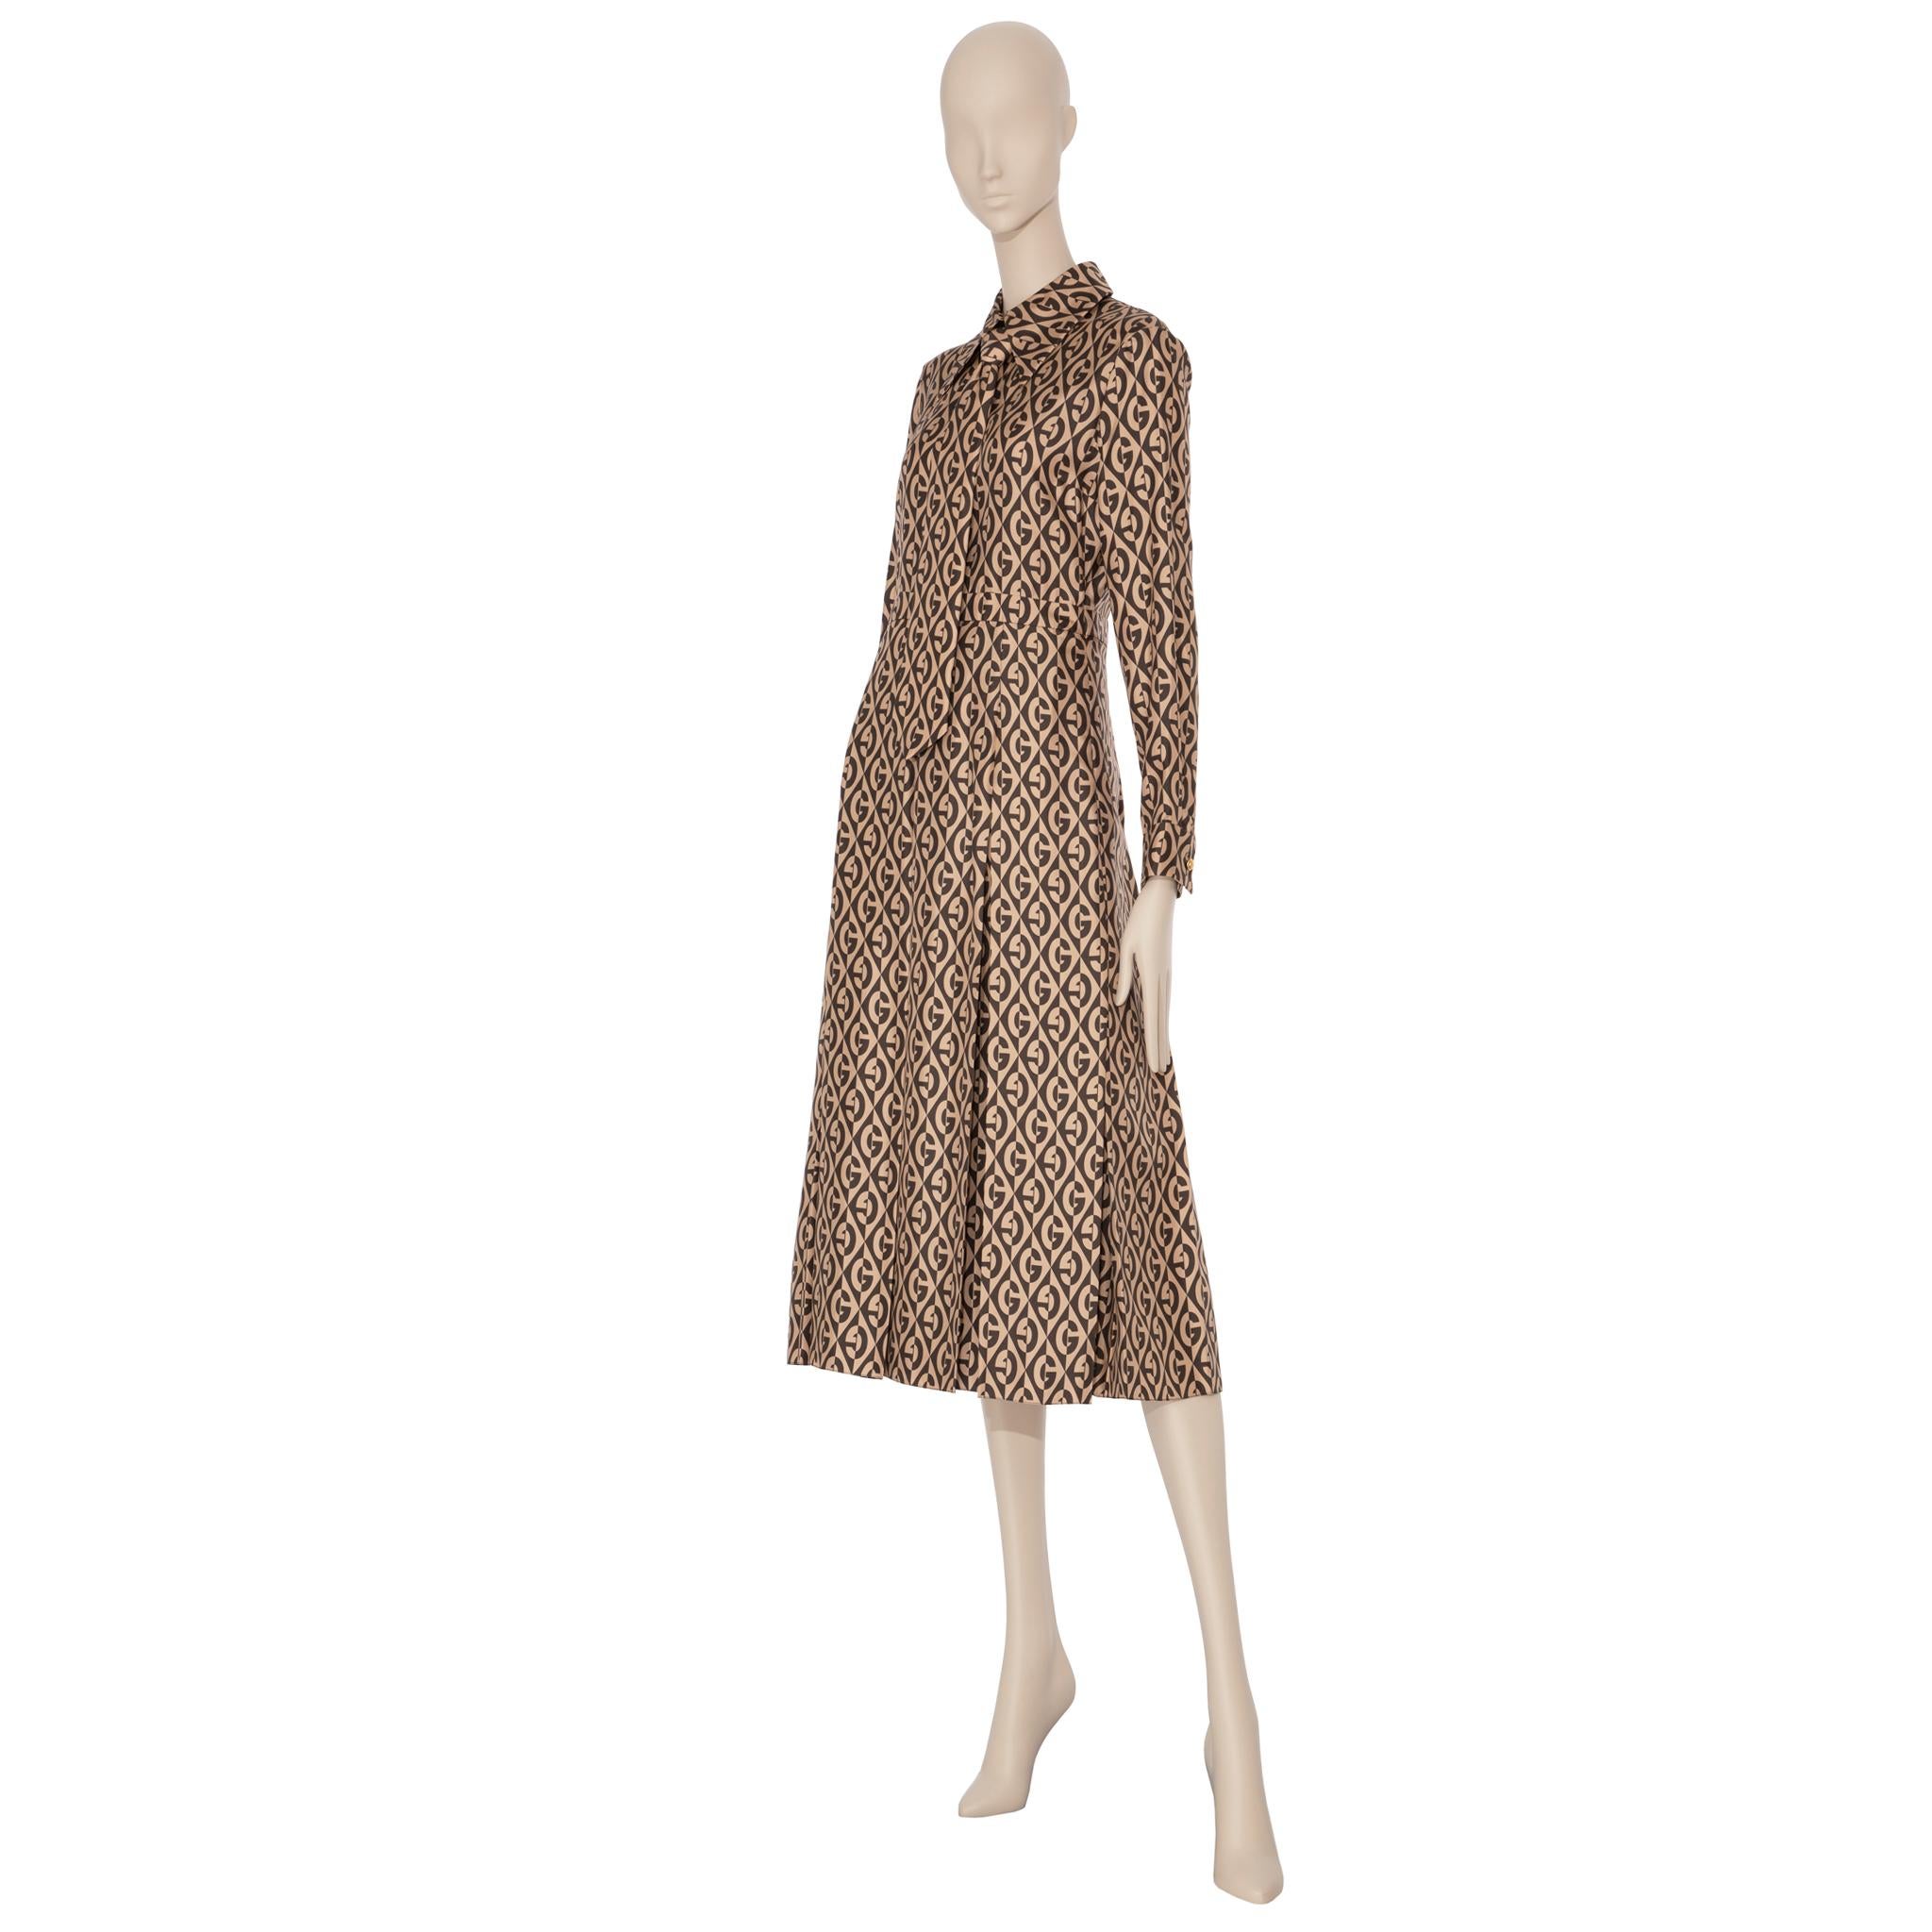 Gucci G Rhombus Brown & Ivory Print Dress Silk 40 IT In New Condition For Sale In DOUBLE BAY, NSW